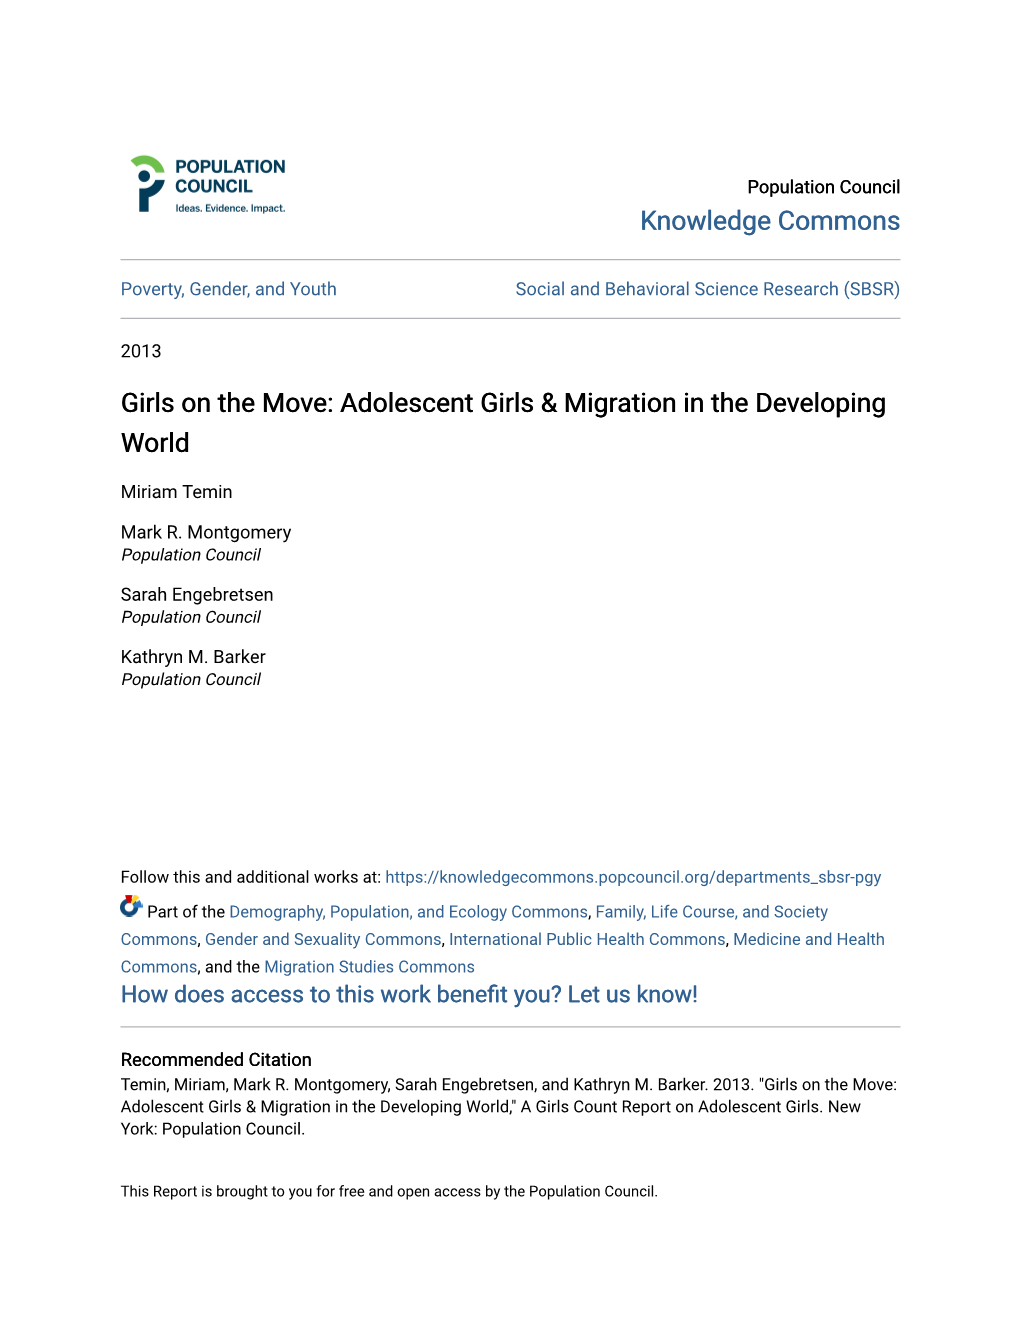 Adolescent Girls & Migration in the Developing World